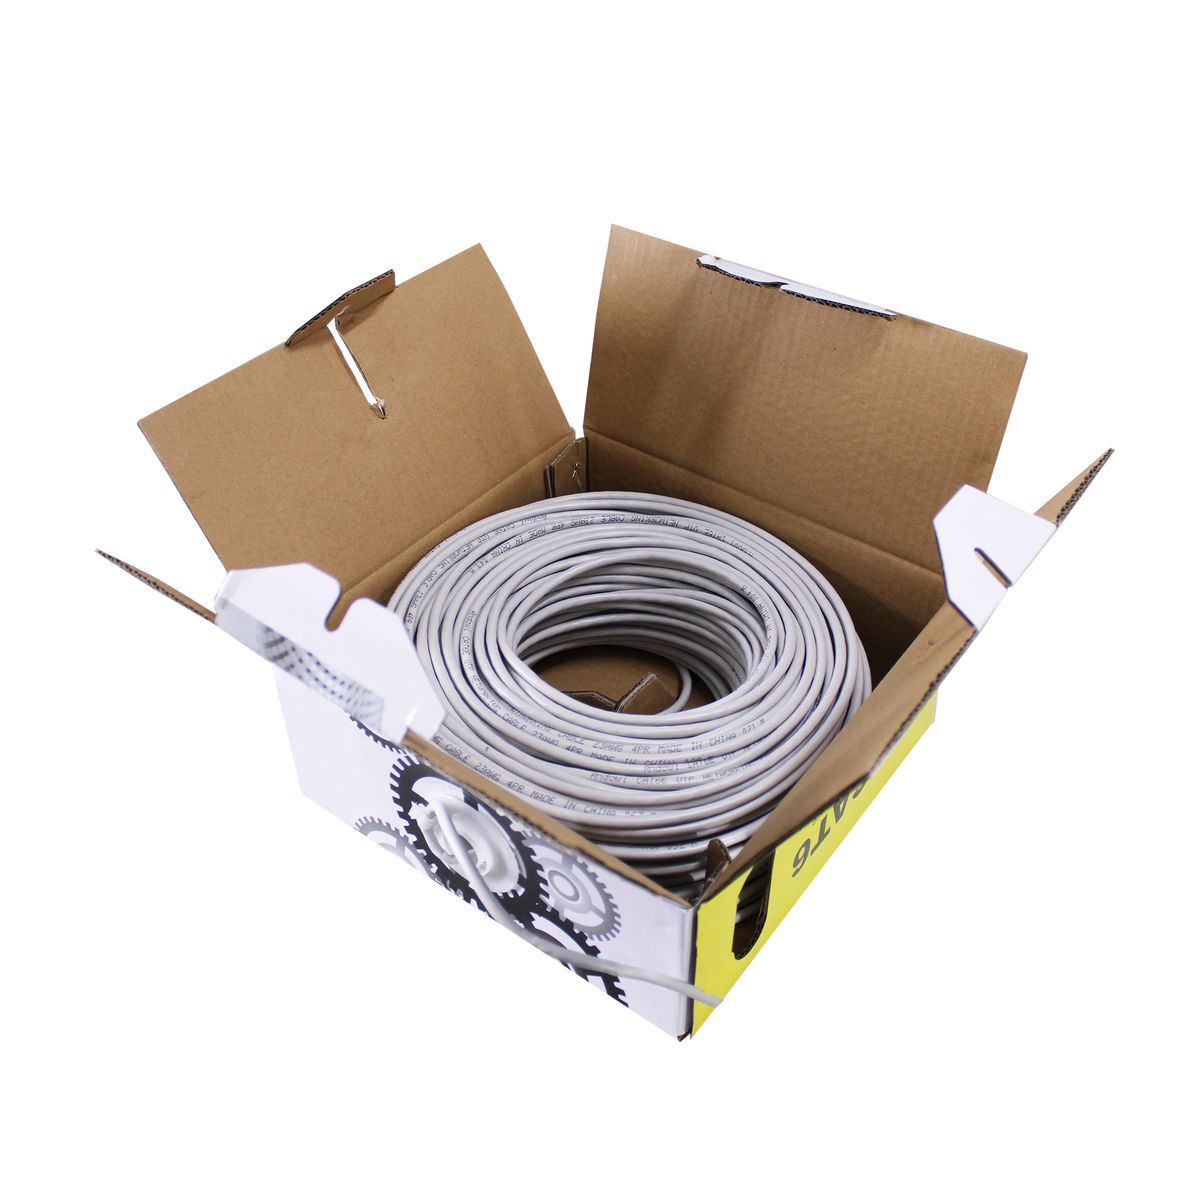 100M Cat6 Twisted 4 Pair Network Cabling Box - Grey